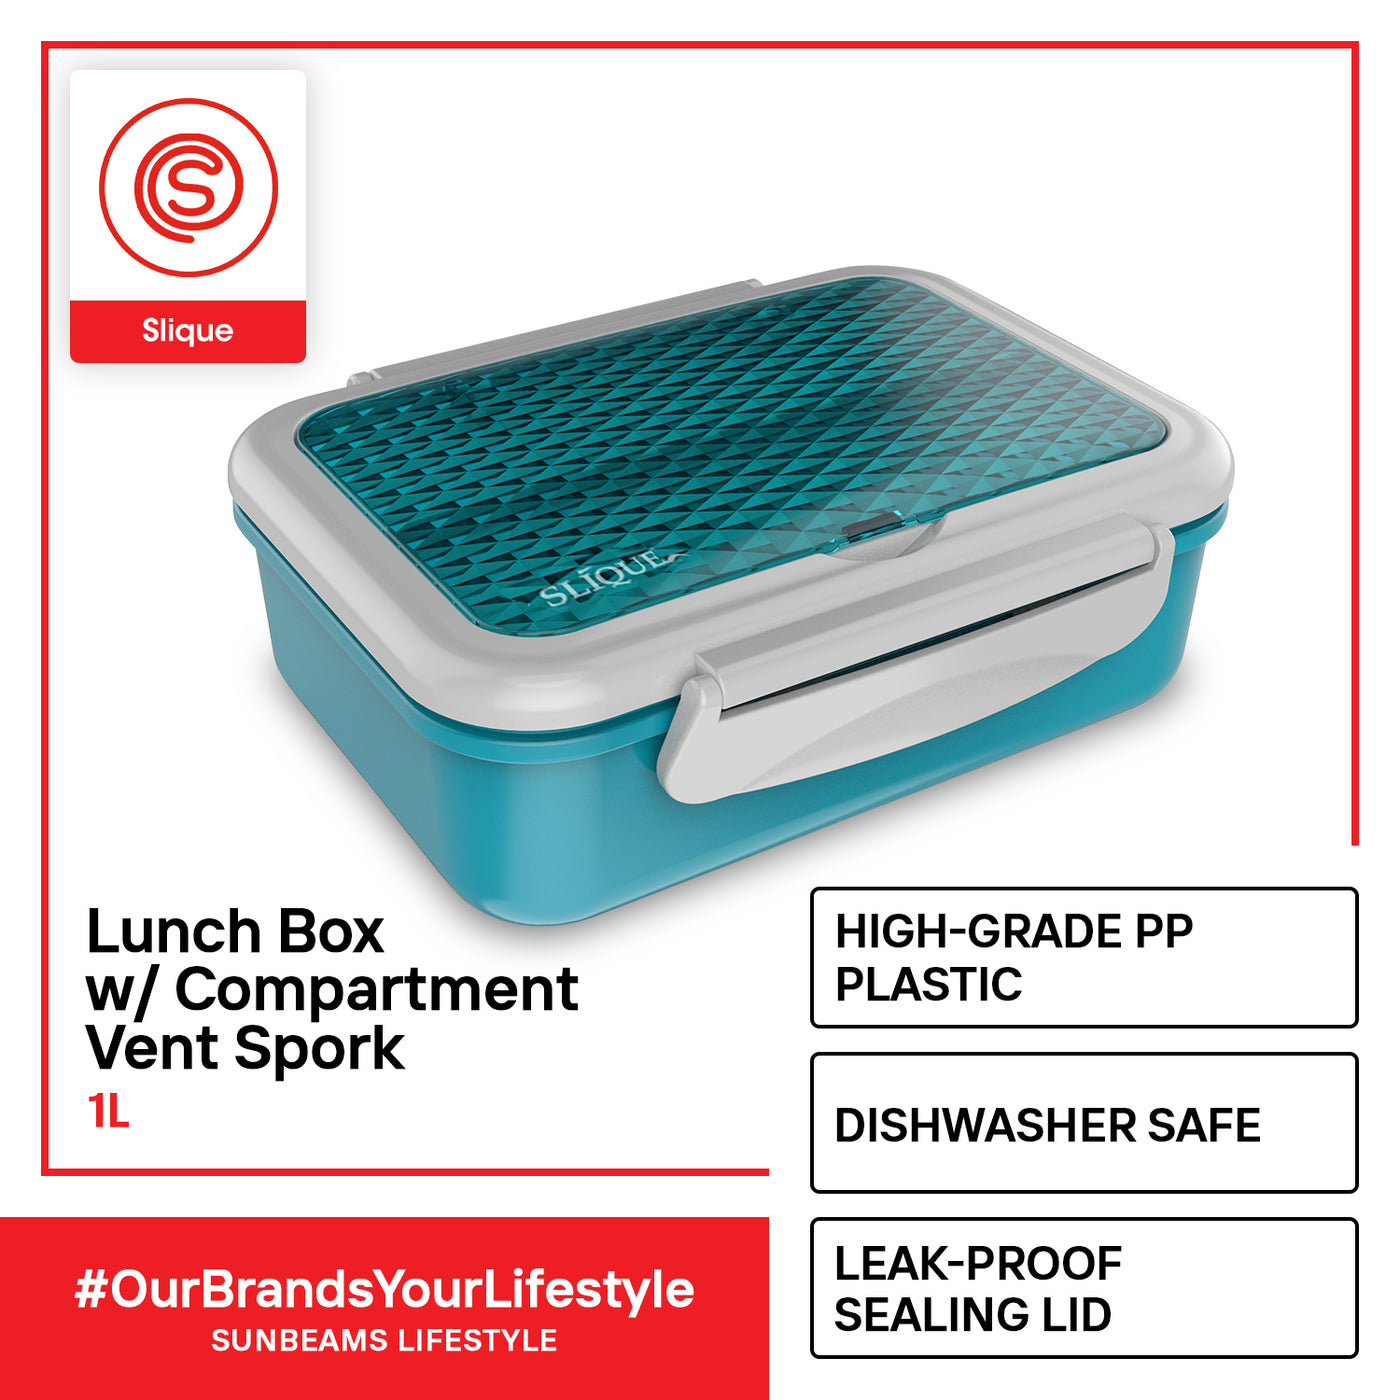 SLIQUE Premium SS Insulated Lunch Box with Compartment 1000ml Amazing Gift Idea For Any Occasion! (Aqua Green)